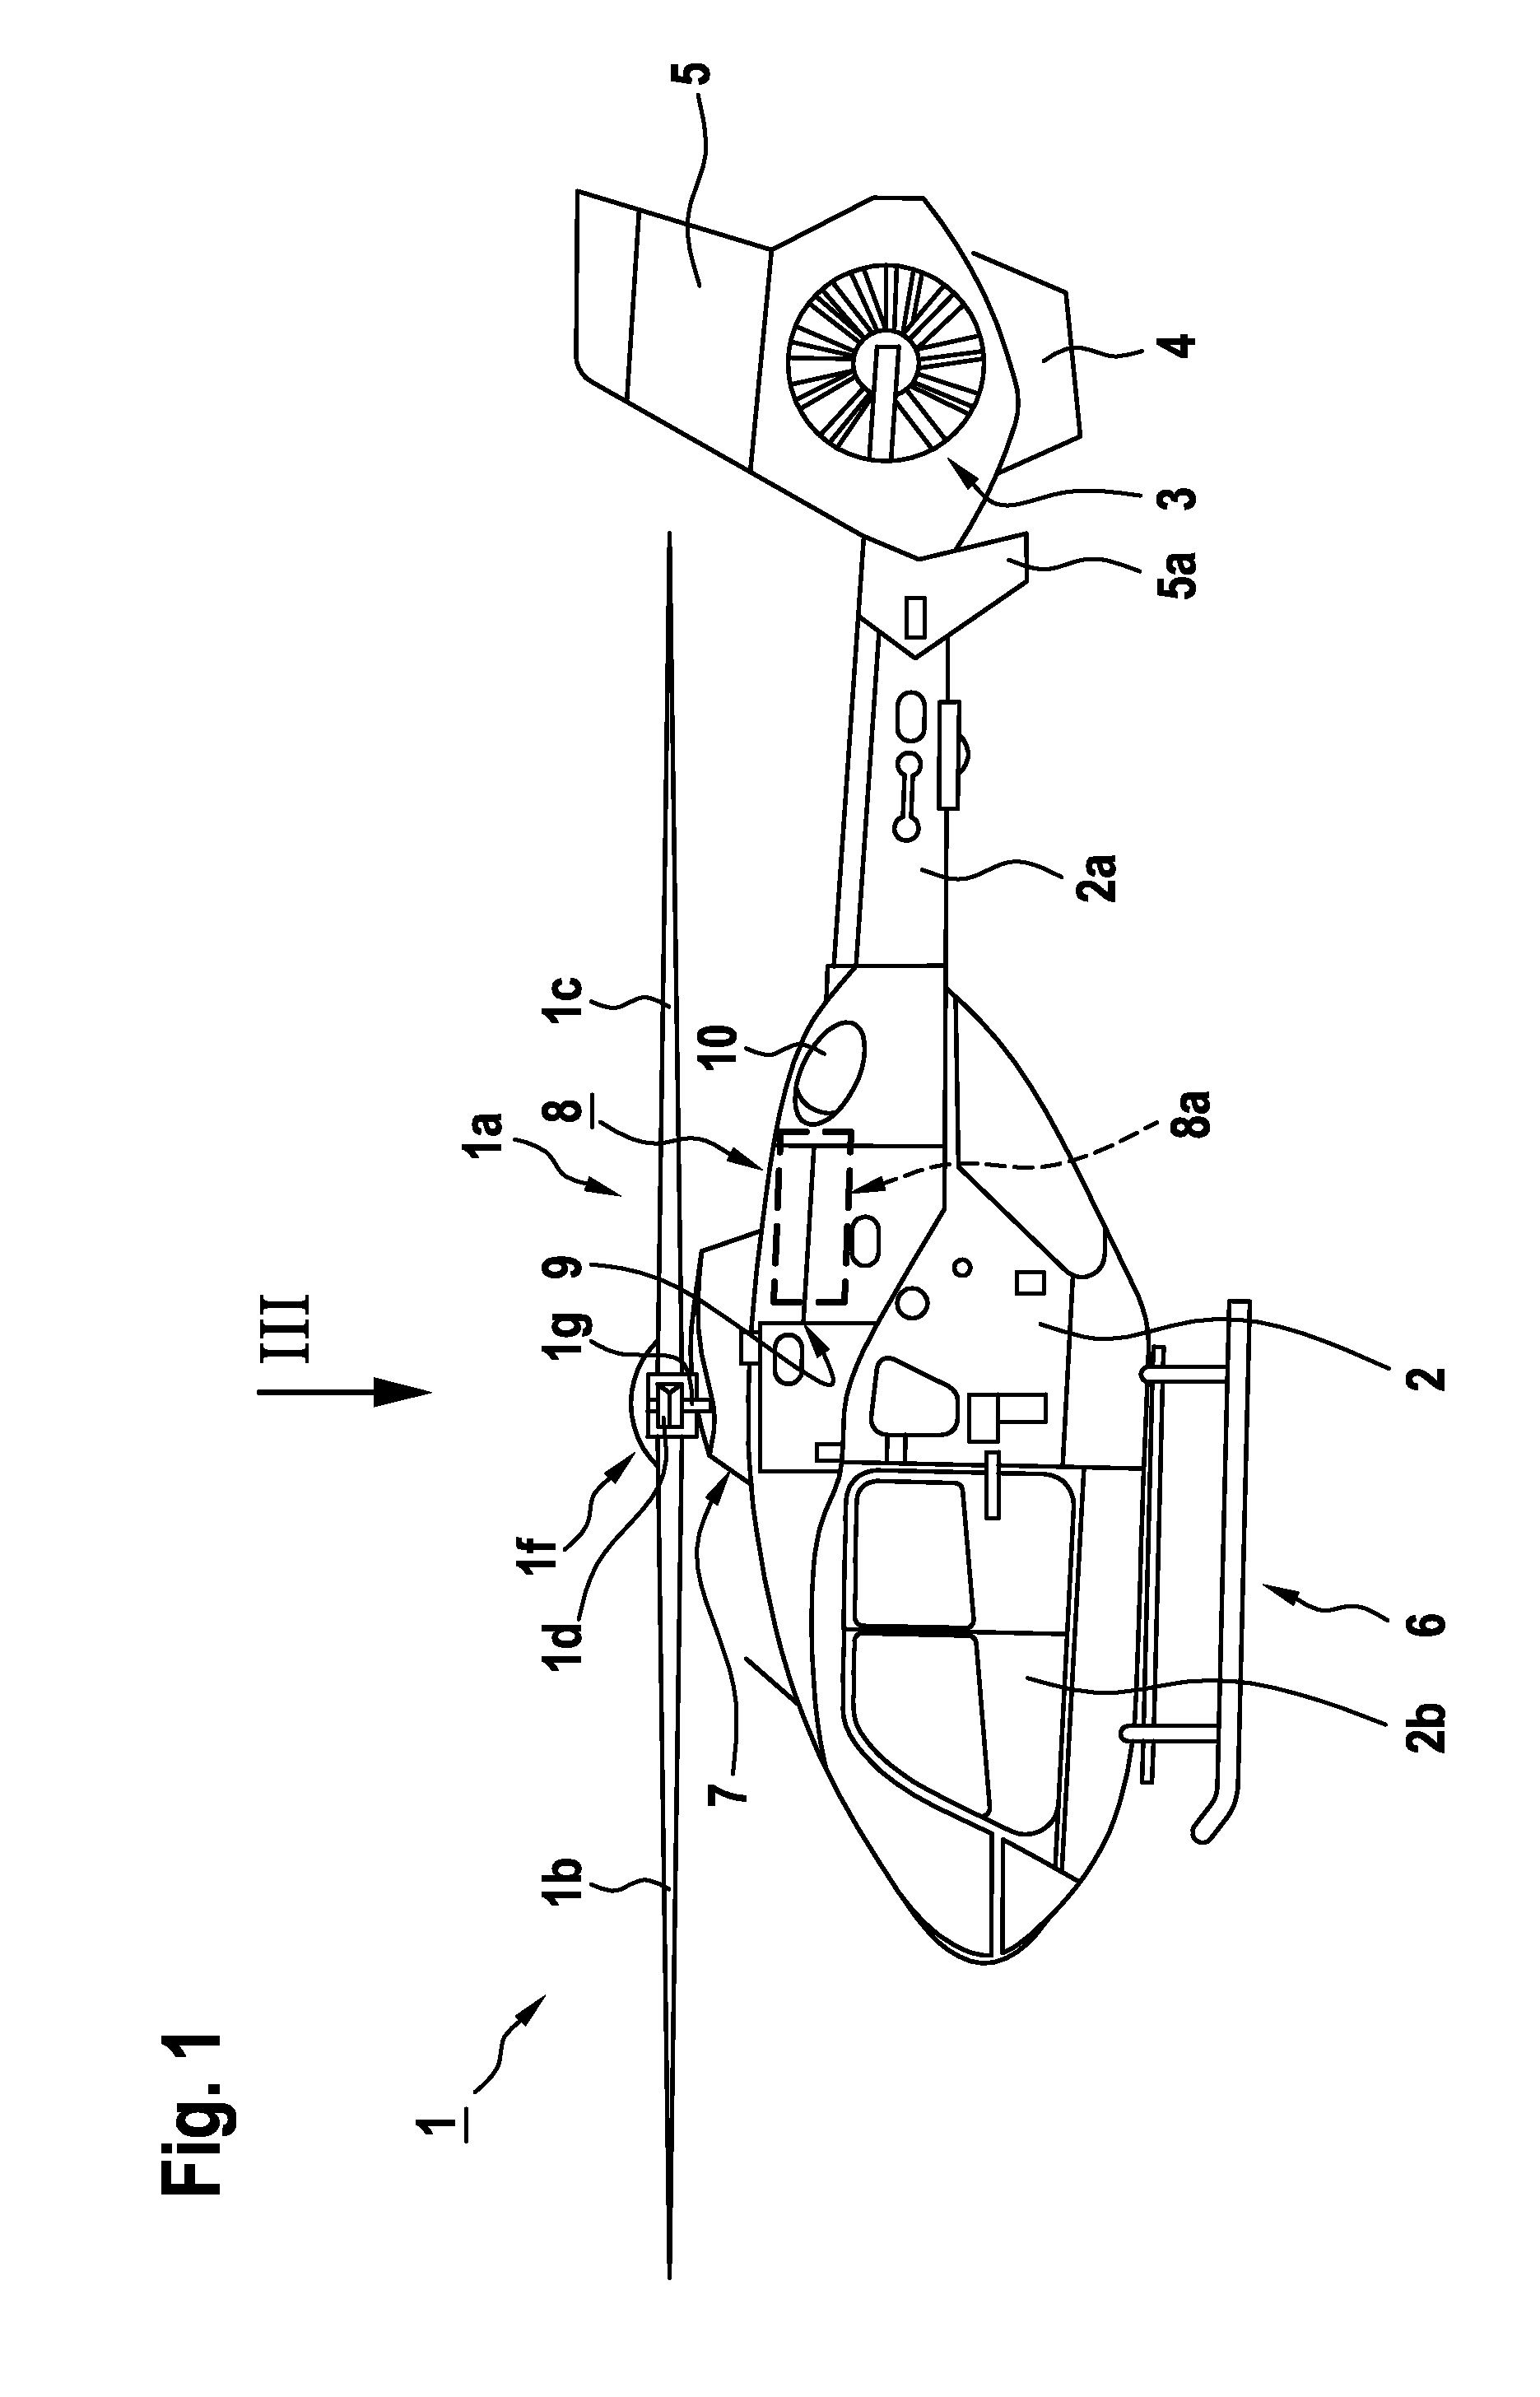 Aircraft with an air intake for an air breathing propulsion engine